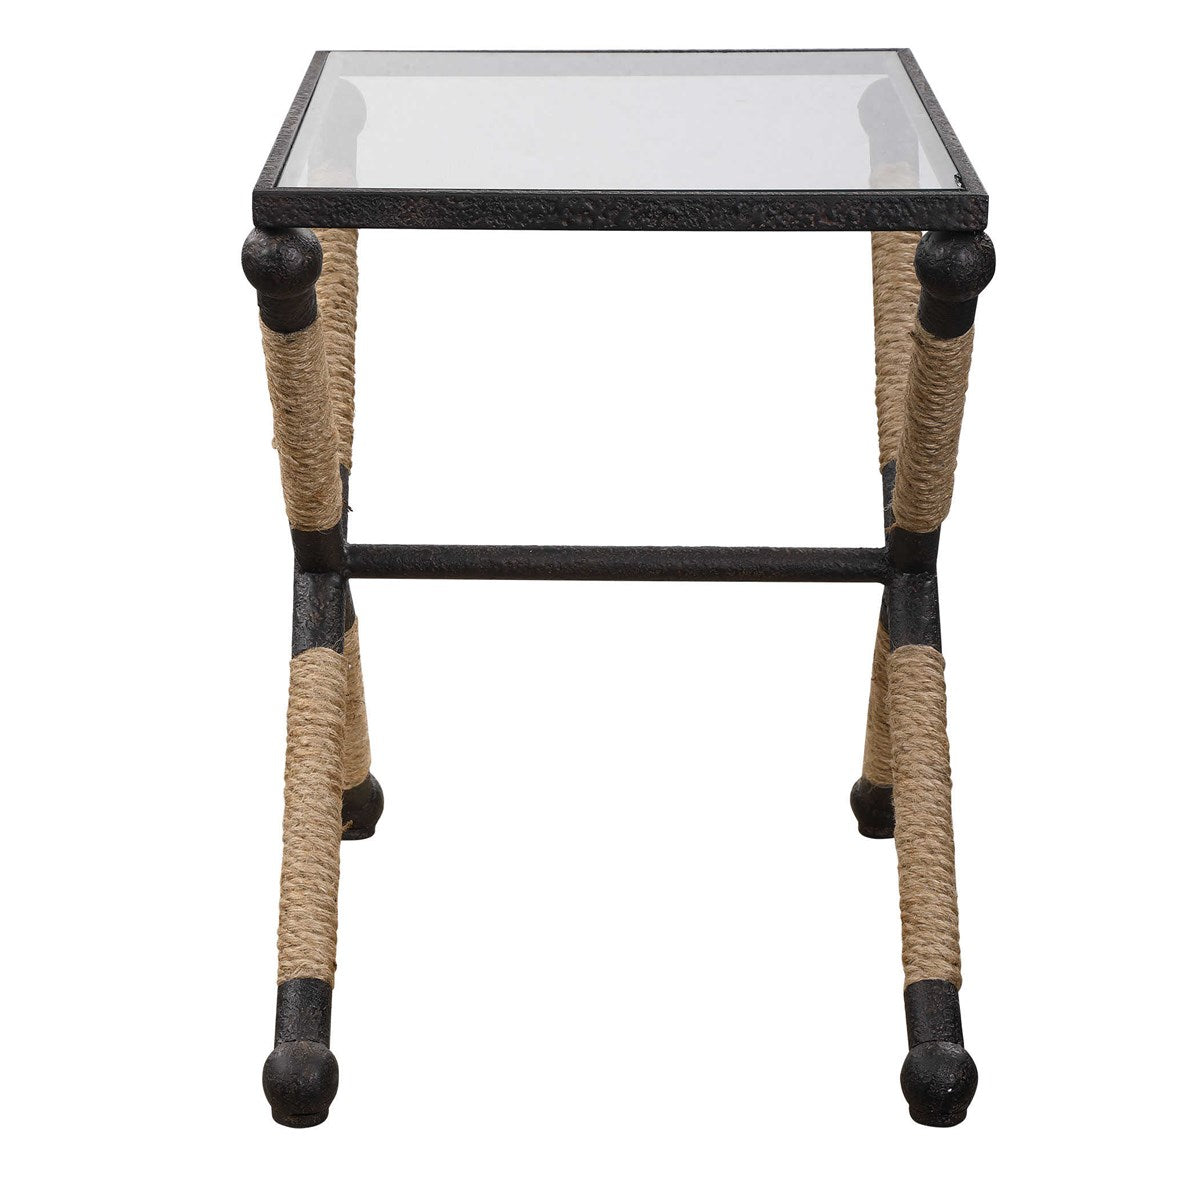 Braddock Metal and Glass Jute Rope Wrapped Coastal Accent Table - 16-in - Mellow Monkey